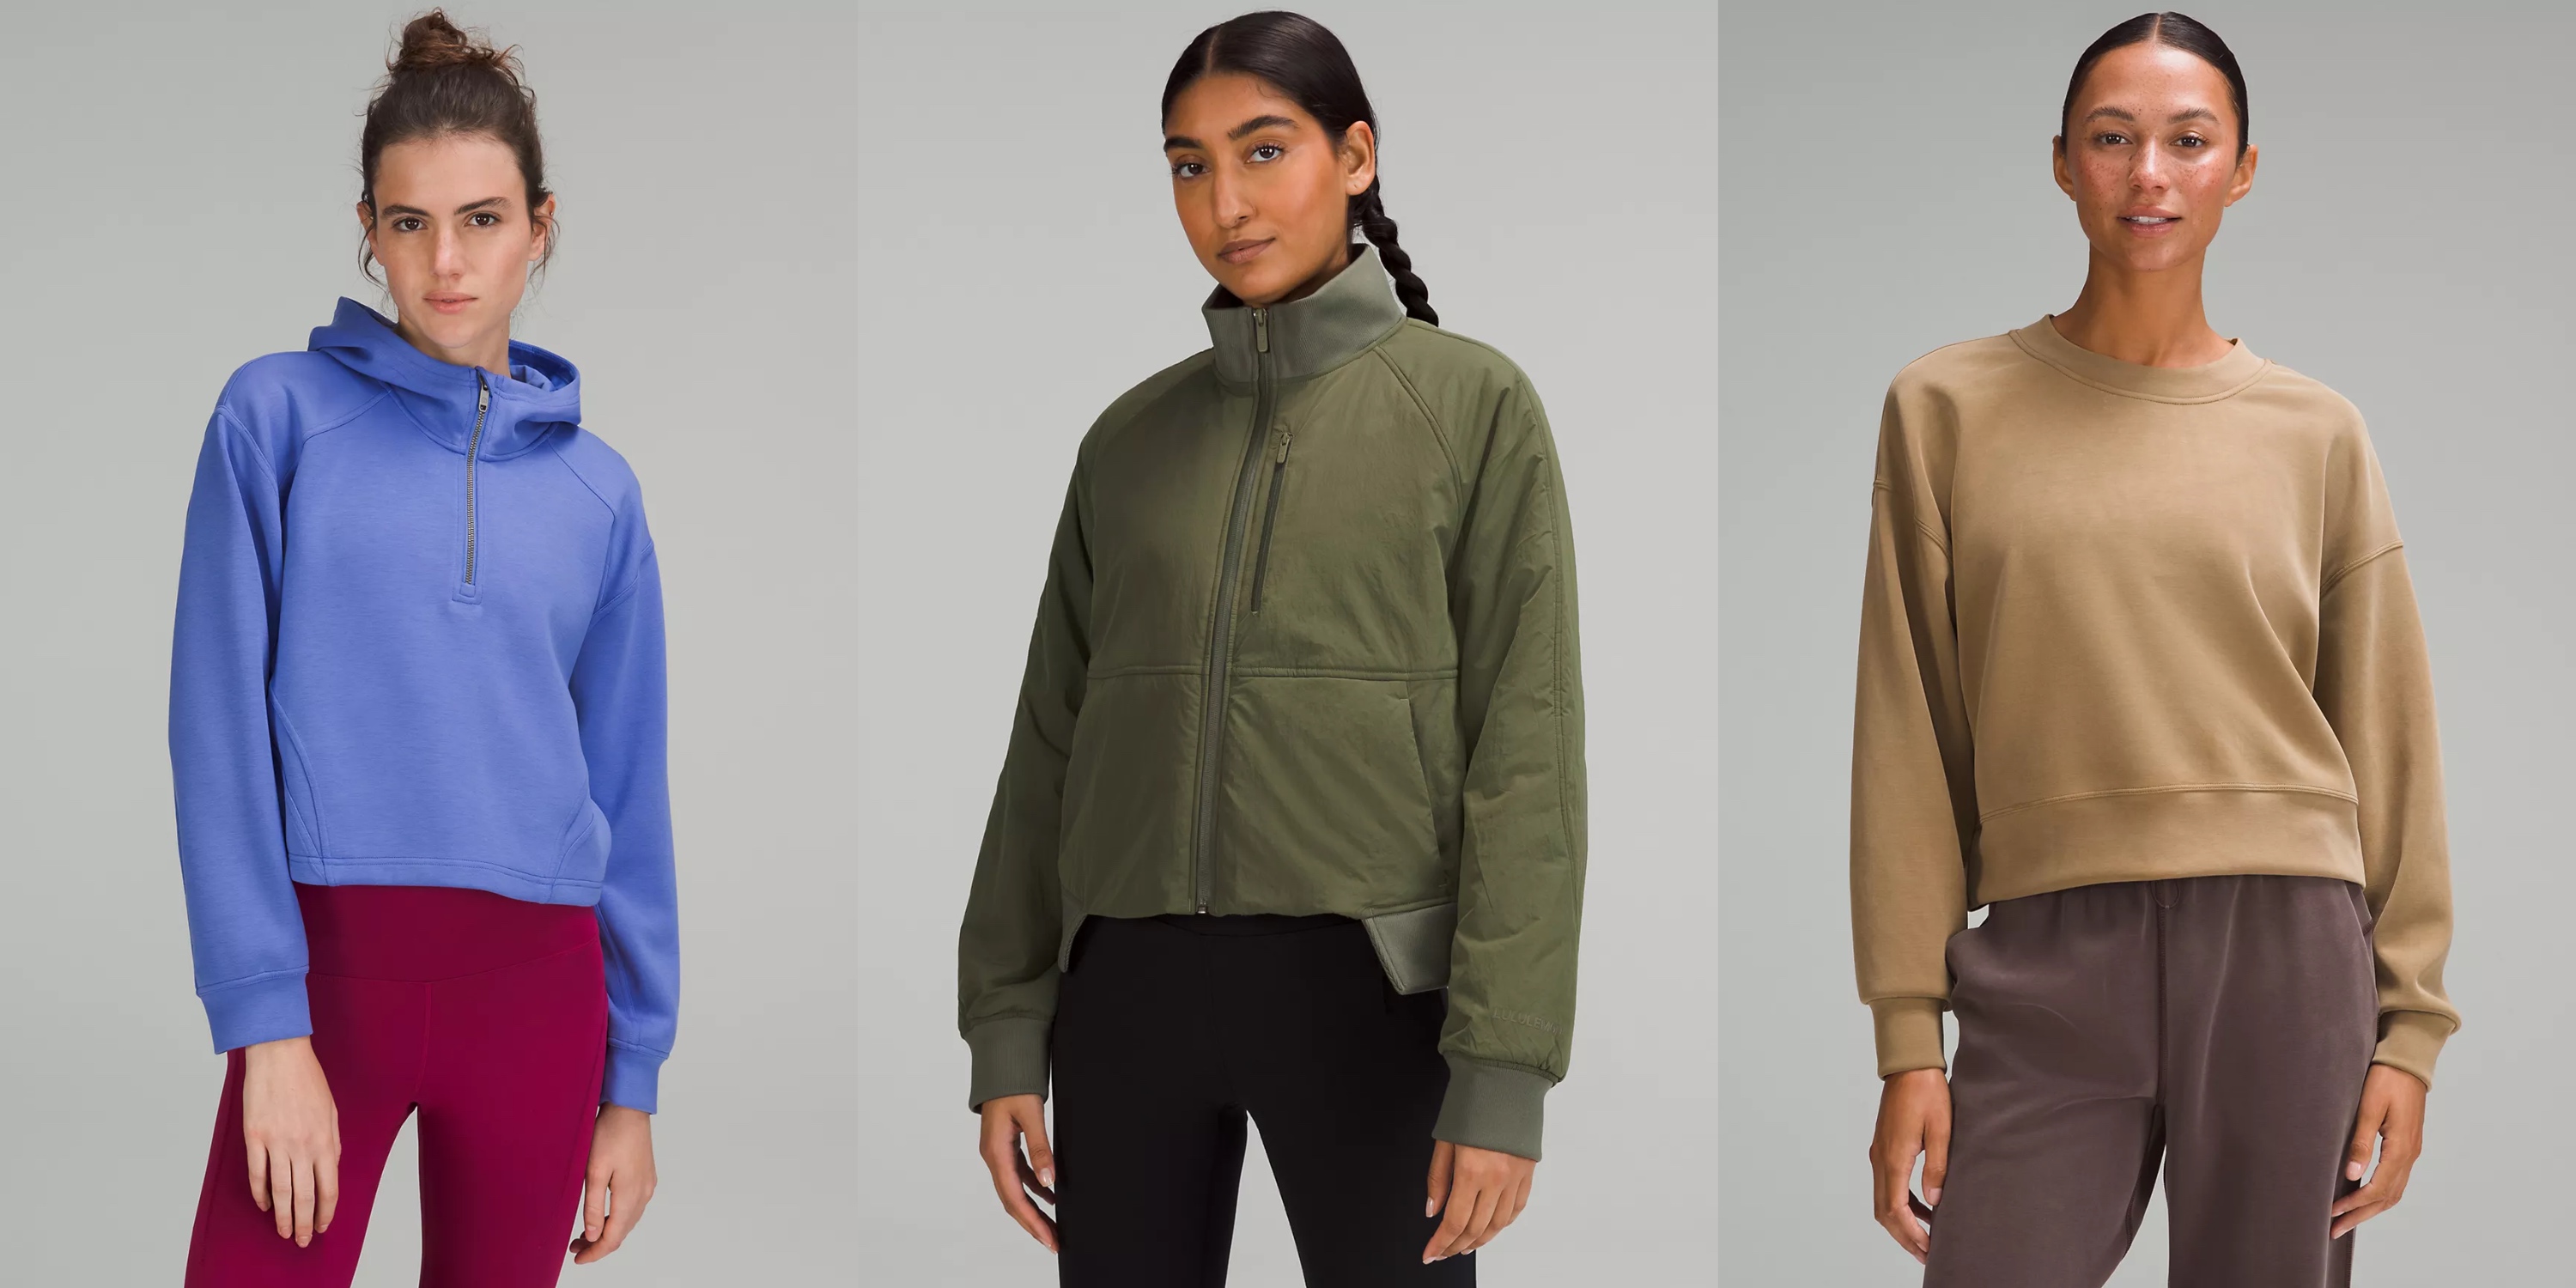 Top Cyber Monday finds on Lululemon pullovers, hoodies and jackets